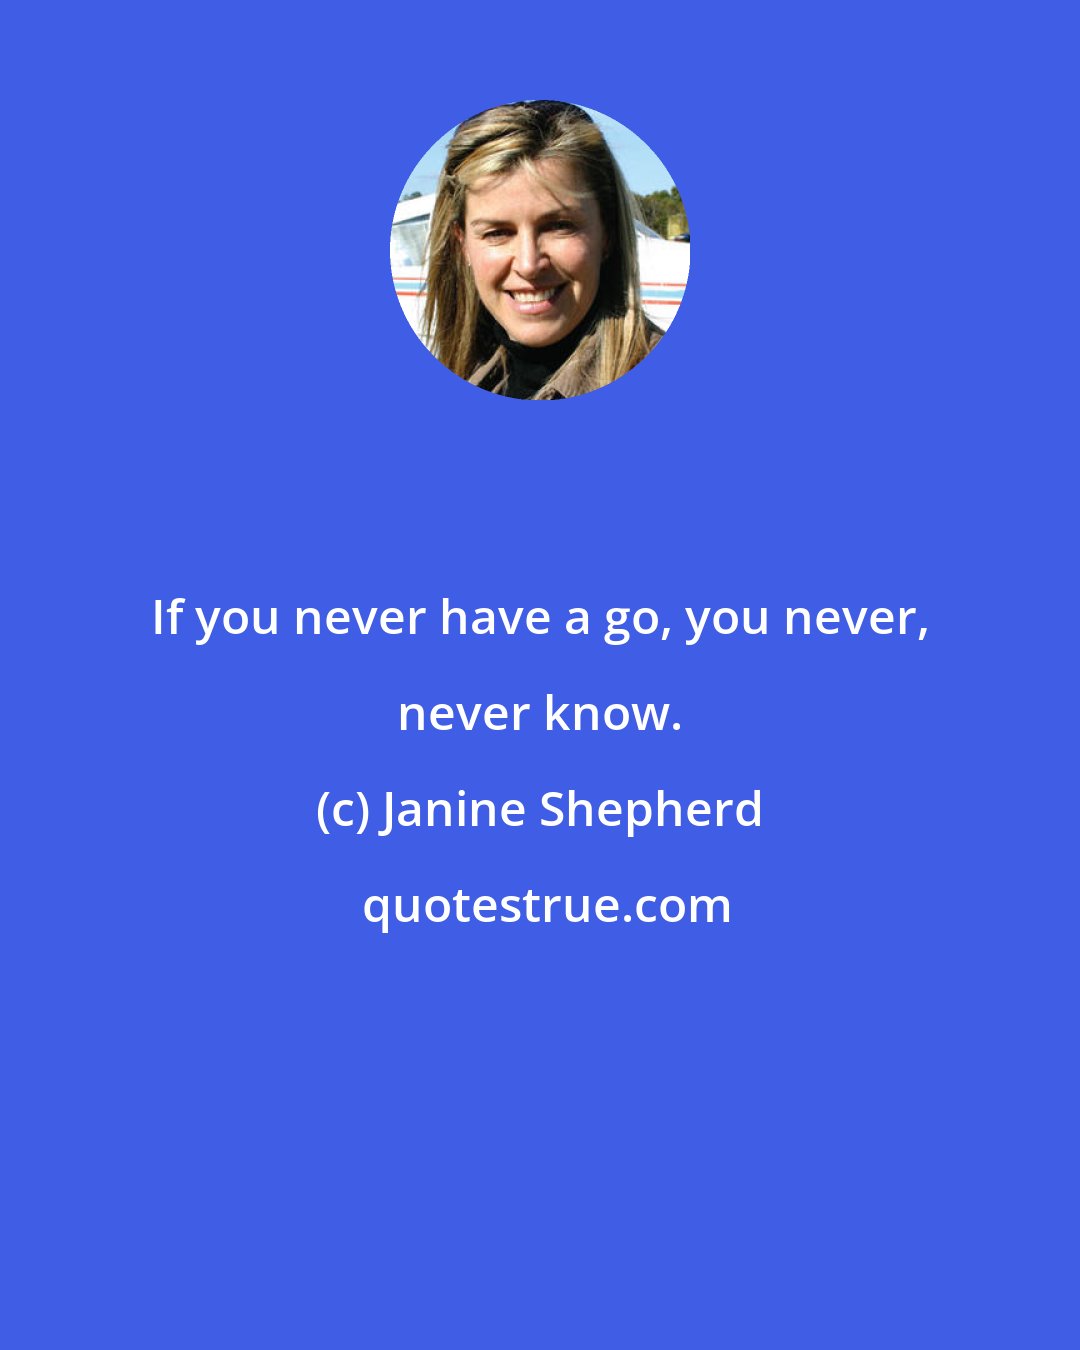 Janine Shepherd: If you never have a go, you never, never know.